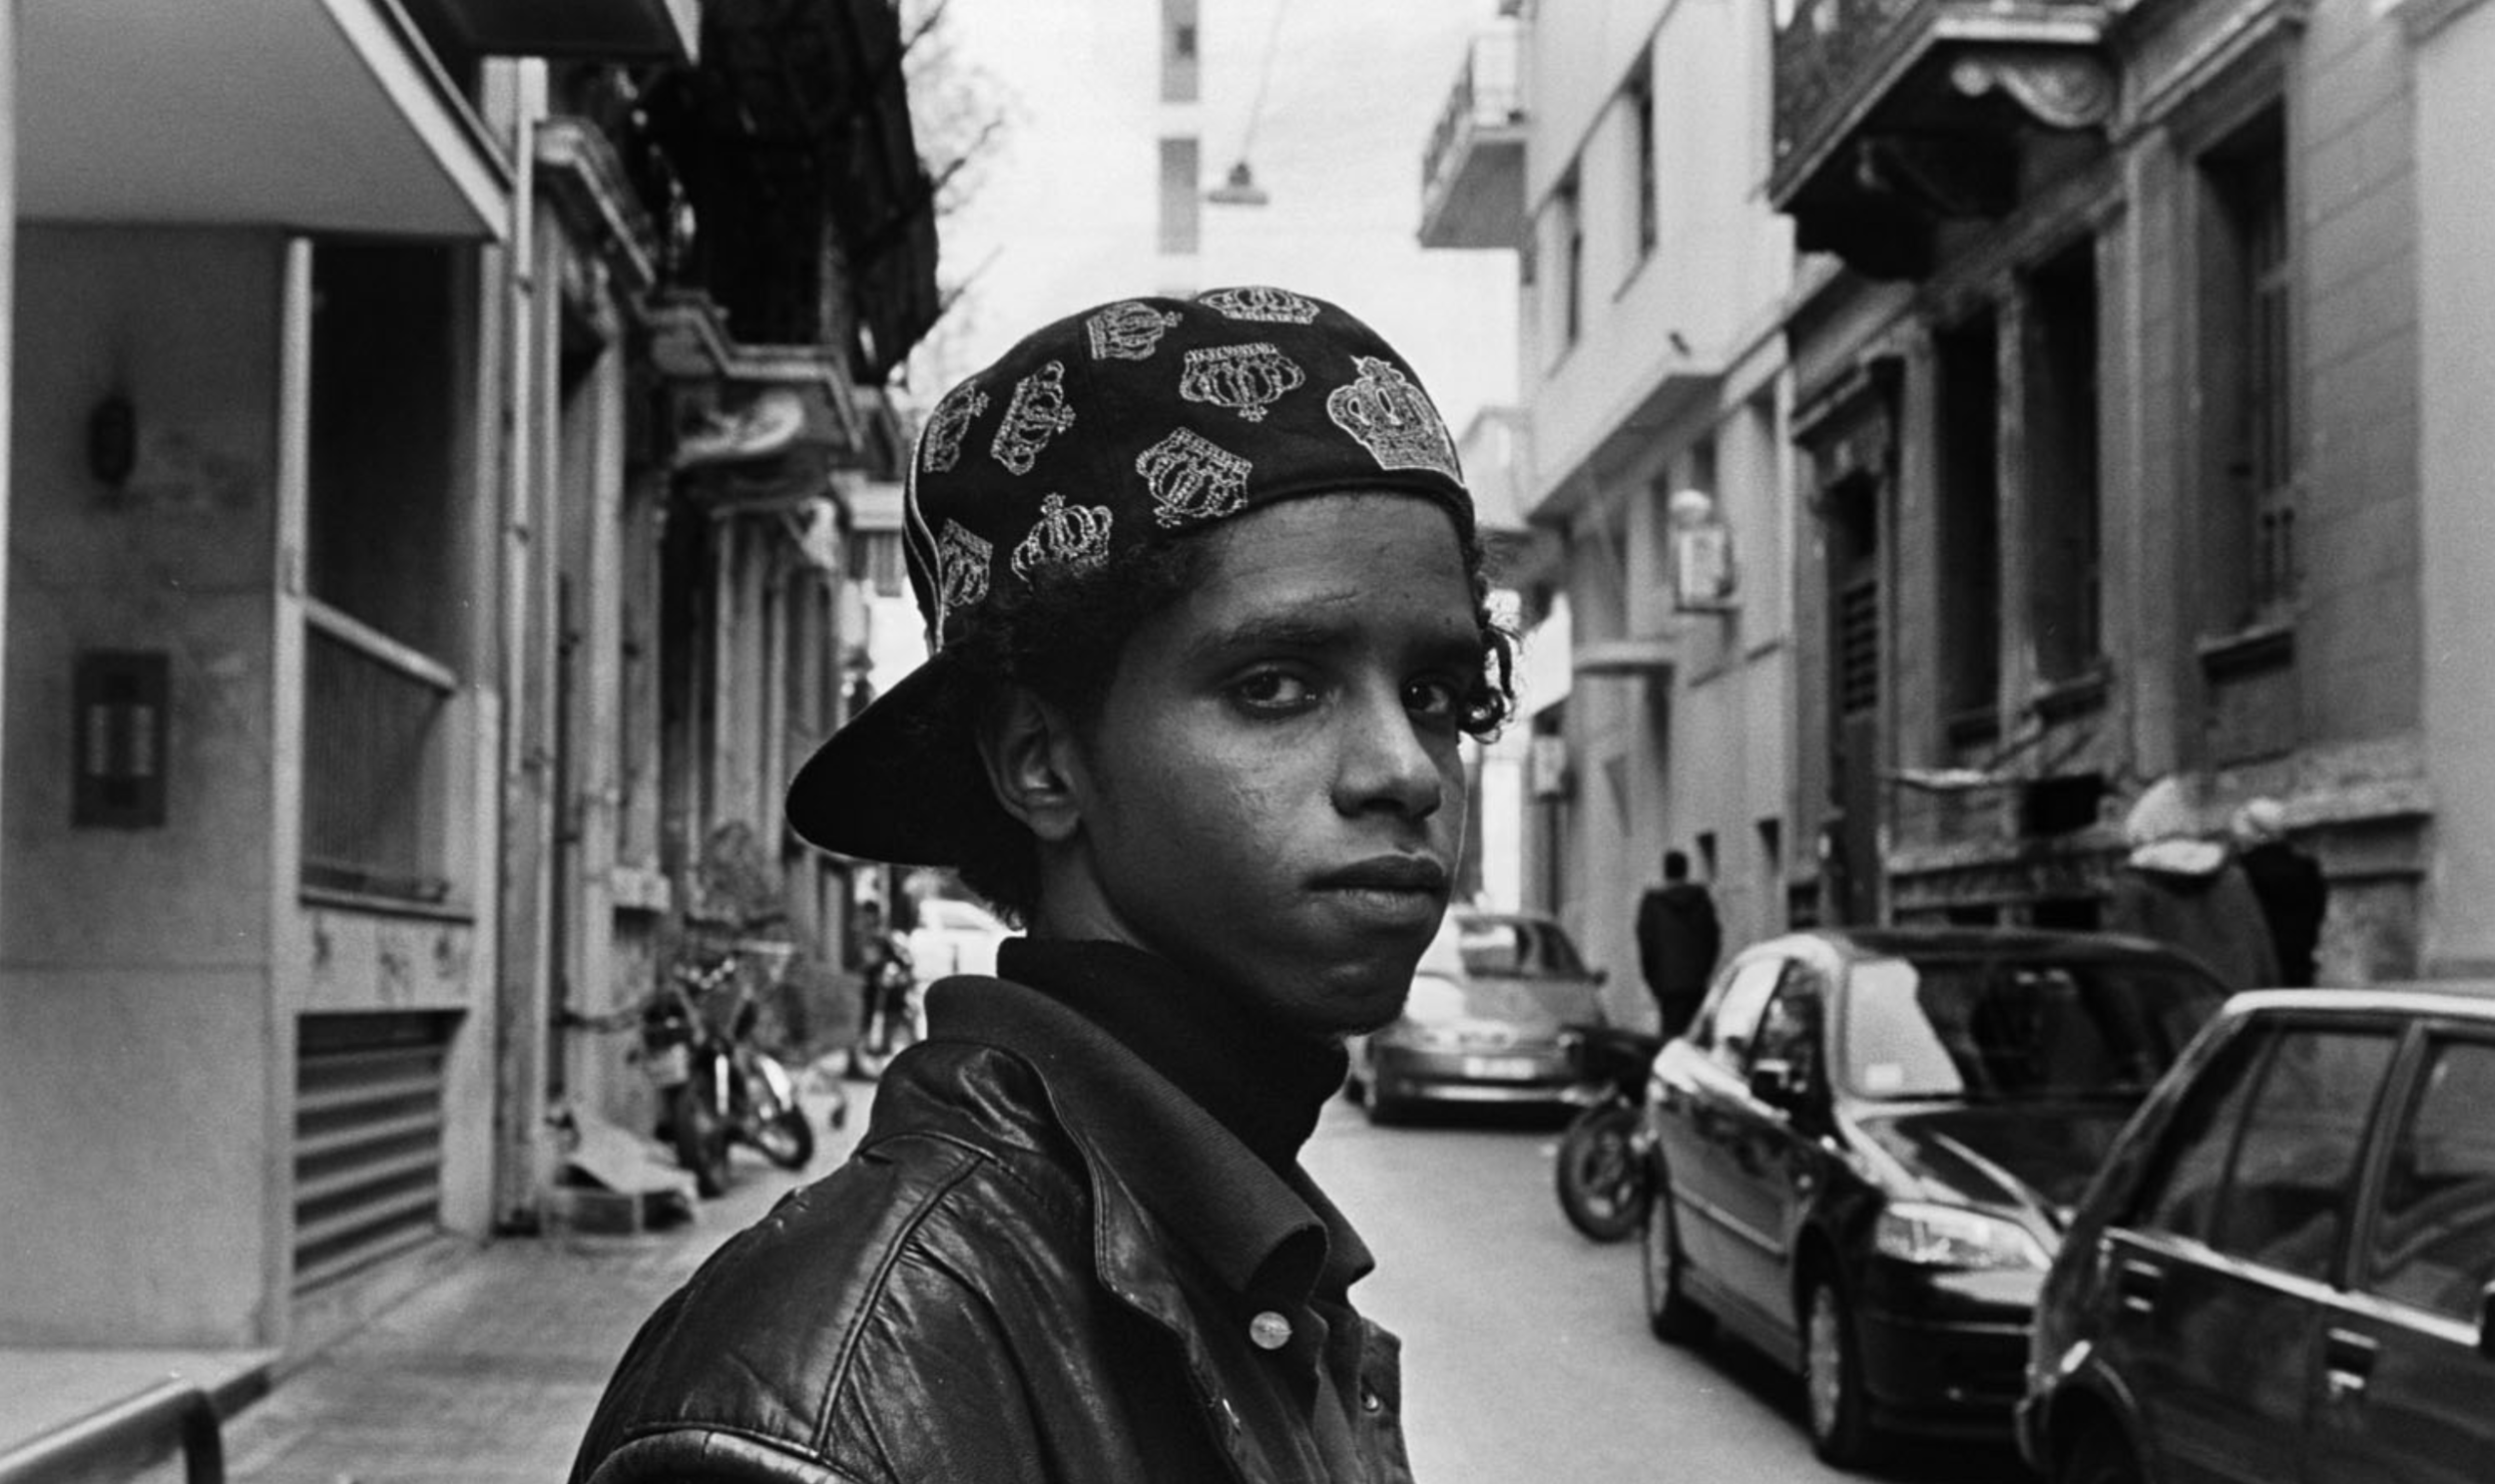  Somali migrant boy in a street in western Athens.  This boy introduced himself to me with a plea to help him get to school or find a job. He lives in a cramped two room-apartment with four female and ten male immigrants. 